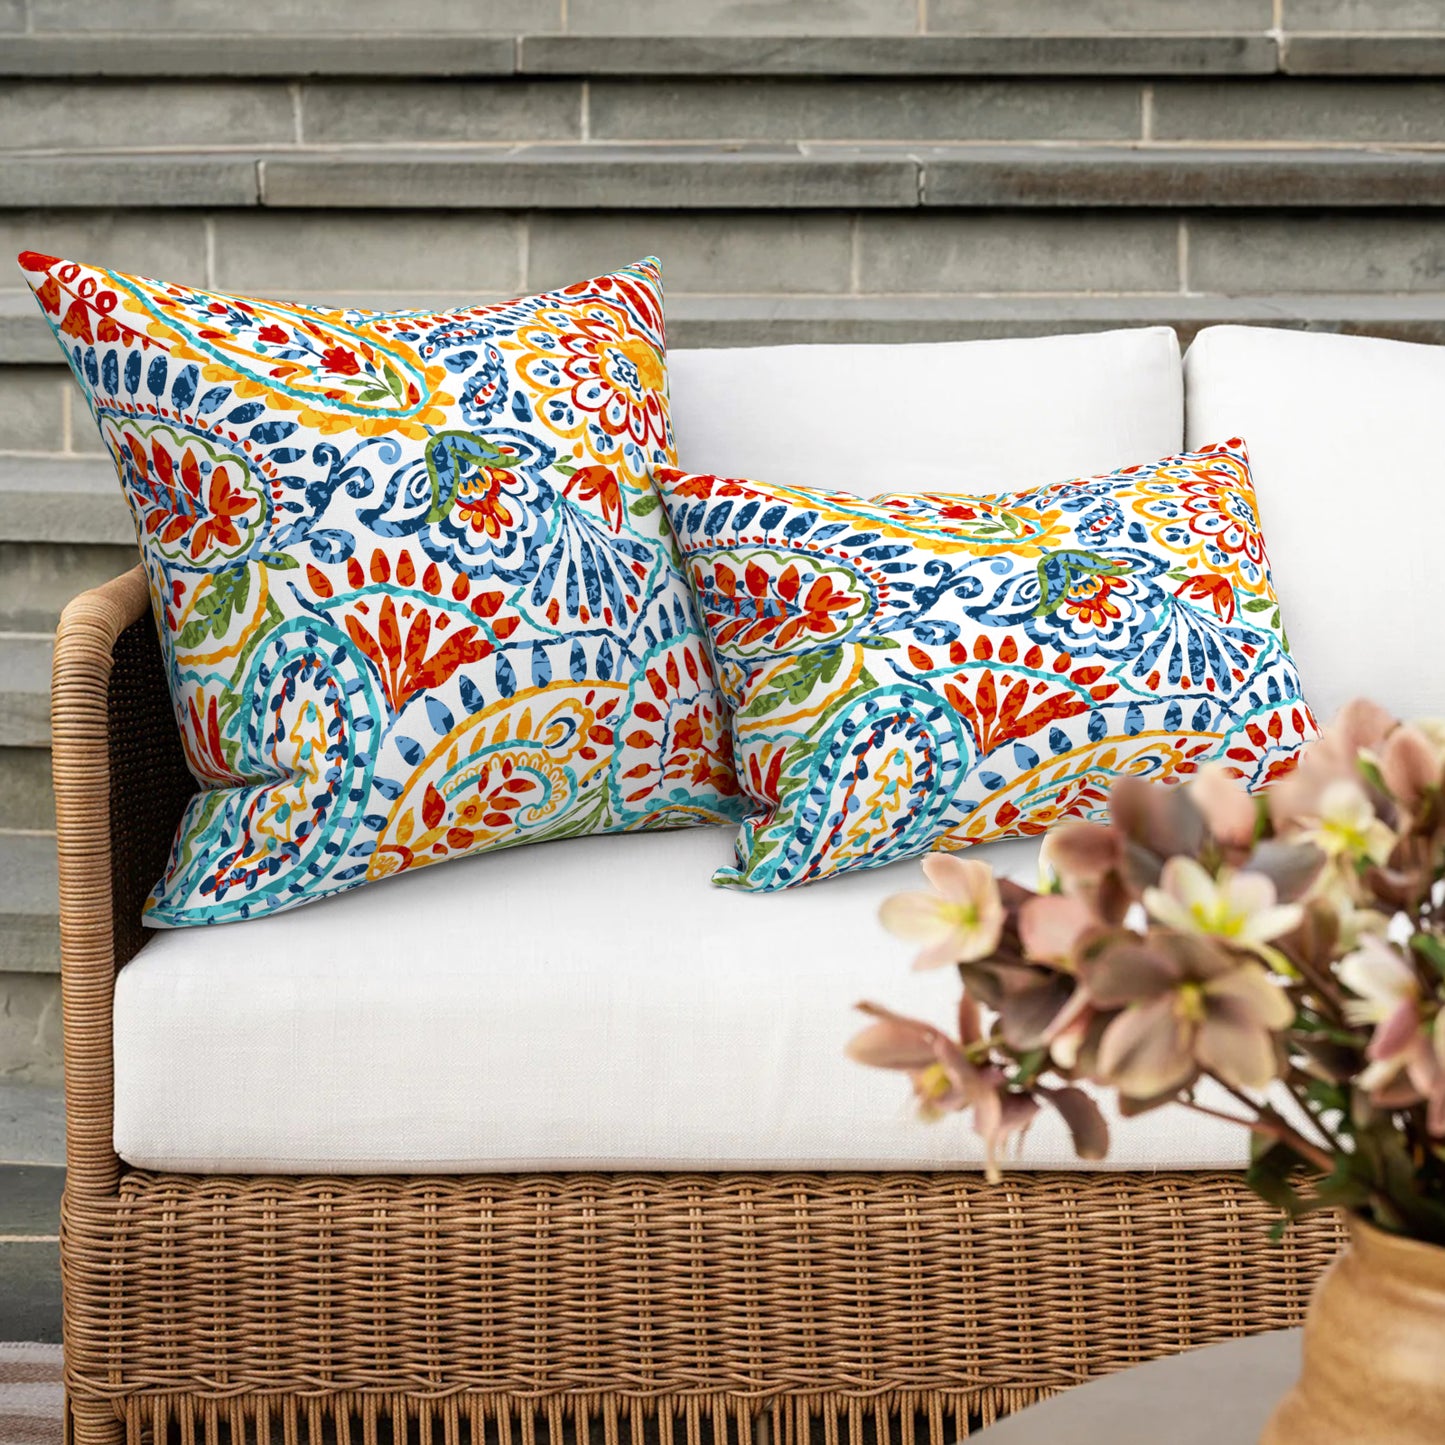 Melody Elephant Outdoor/Indoor Throw Pillow Covers Set of 2, All Weather Square Pillow Cases 16x16 Inch, Patio Cushion Pillow of Home Furniture Use, Paisley Multi